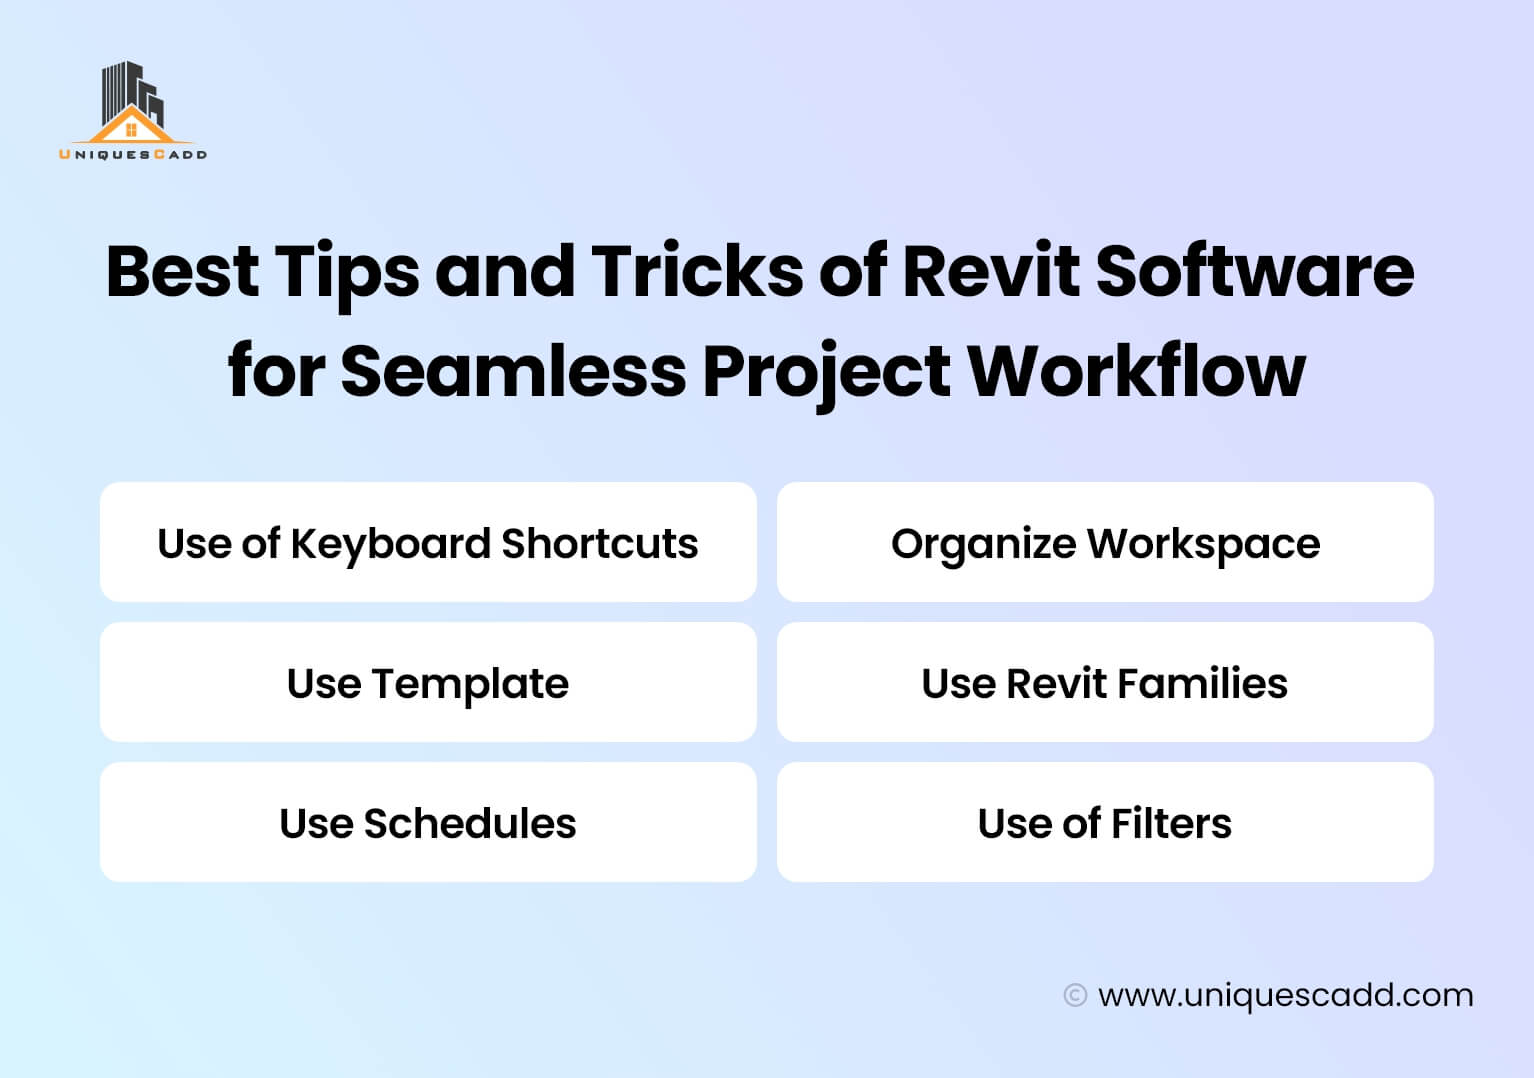 Best Tips and Tricks of Revit Software for Seamless Project Workflow